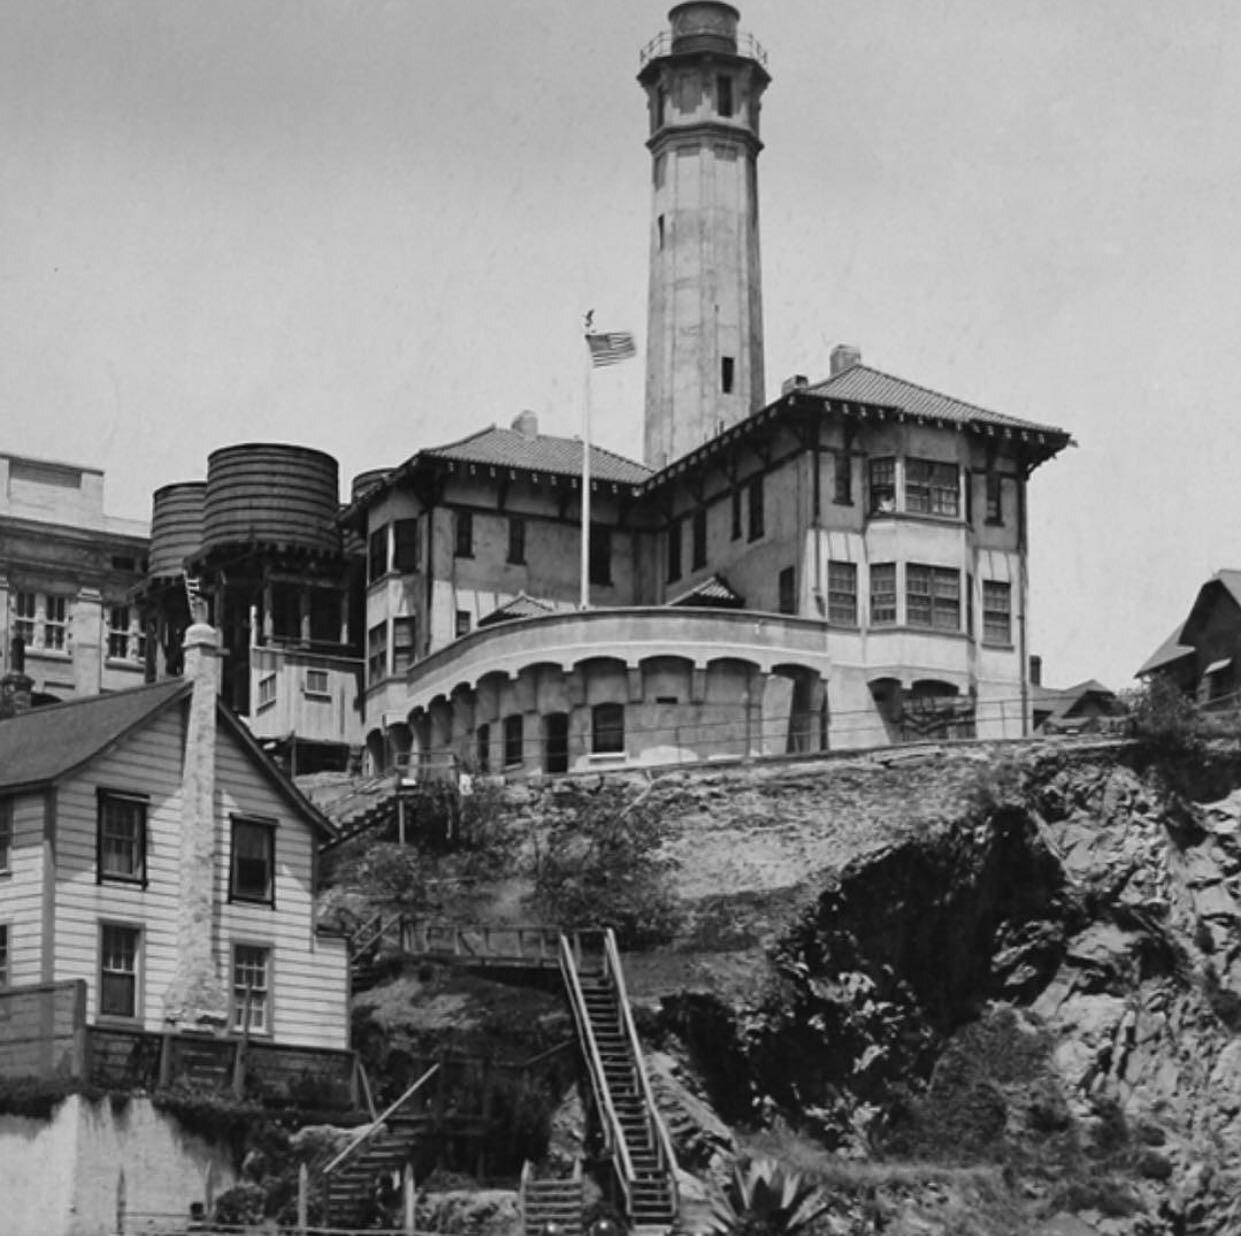 Did you know that Alcatraz housed the Pacific Coast&rsquo;s first lighthouse? A small lighthouse was constructed on top of the island in 1854, making it the first of its kind on the West Coast of the United States! 

.
.
.
.
.
.
.
.
.
#alarm22
#escap